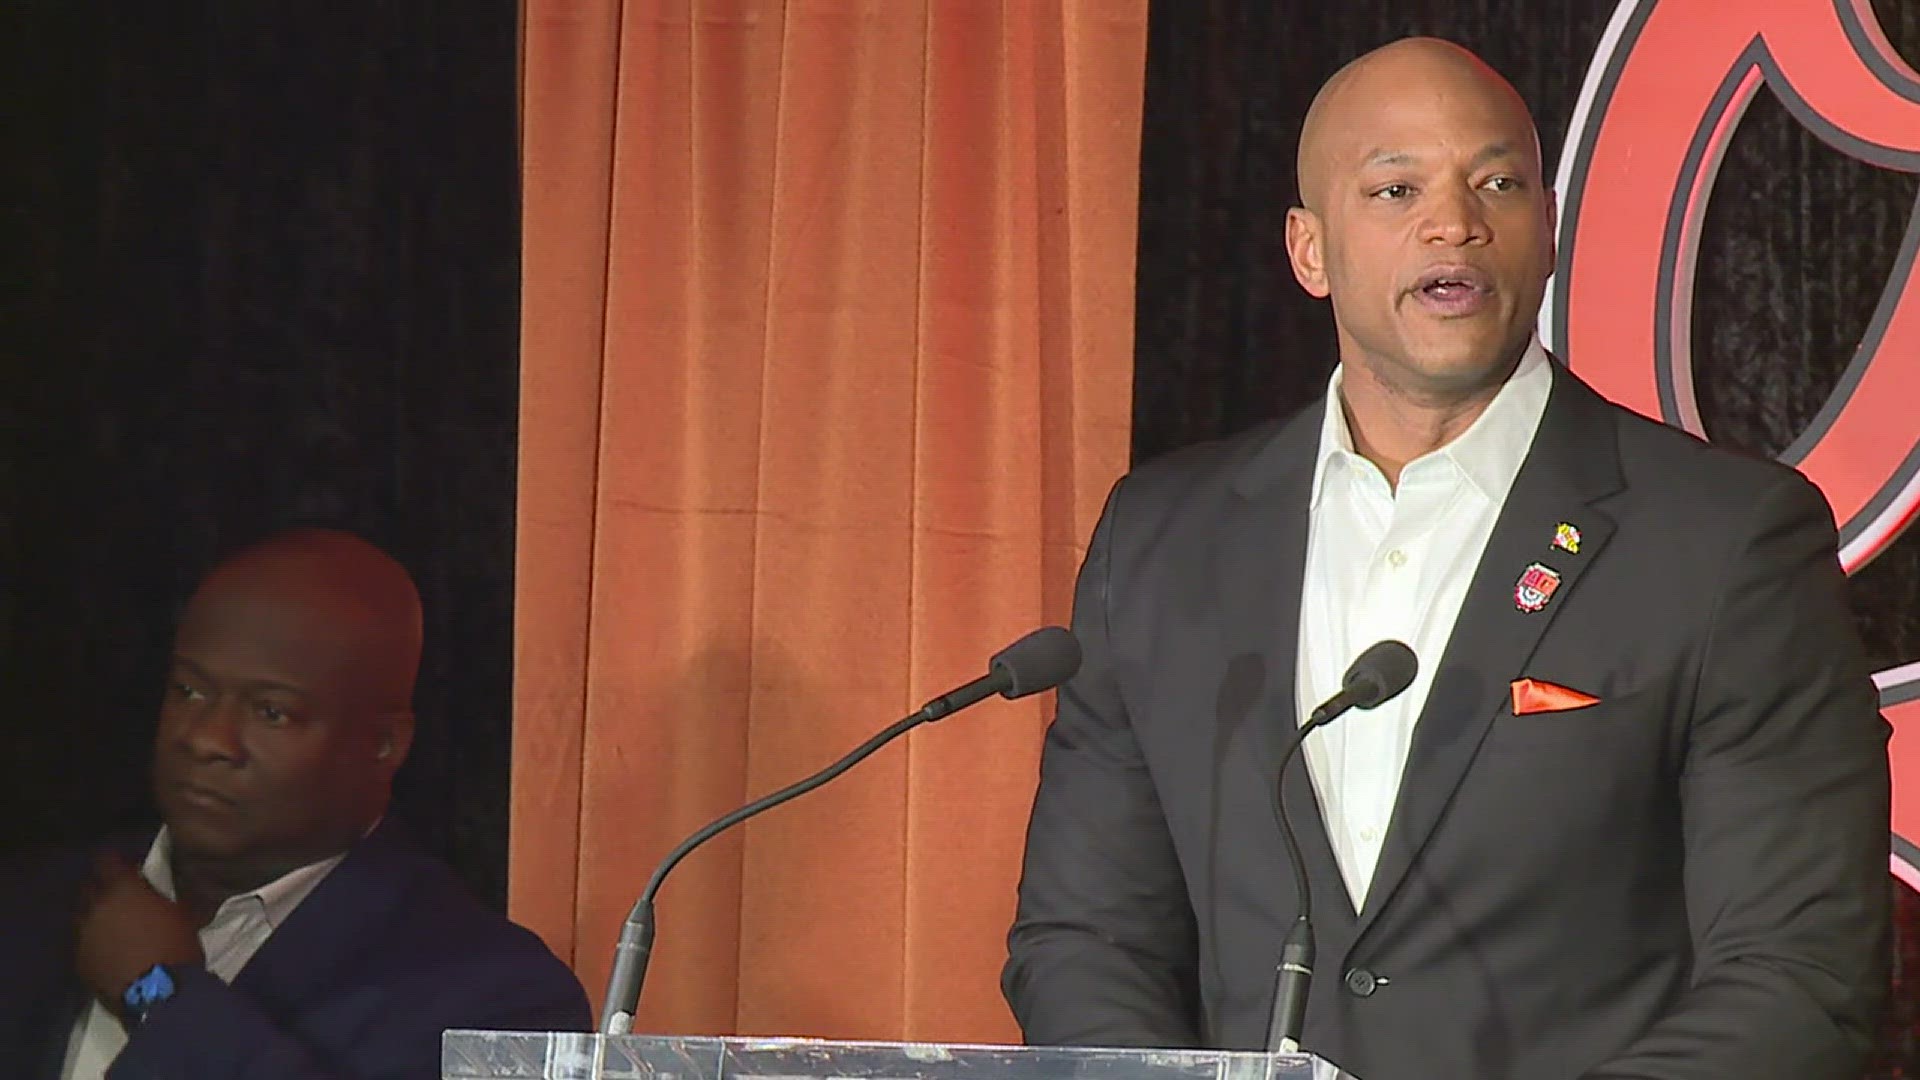 Just days removed from the bridge collapse in Baltimore, Maryland Gov. Wes Moore addressed the recovery and rebuild.